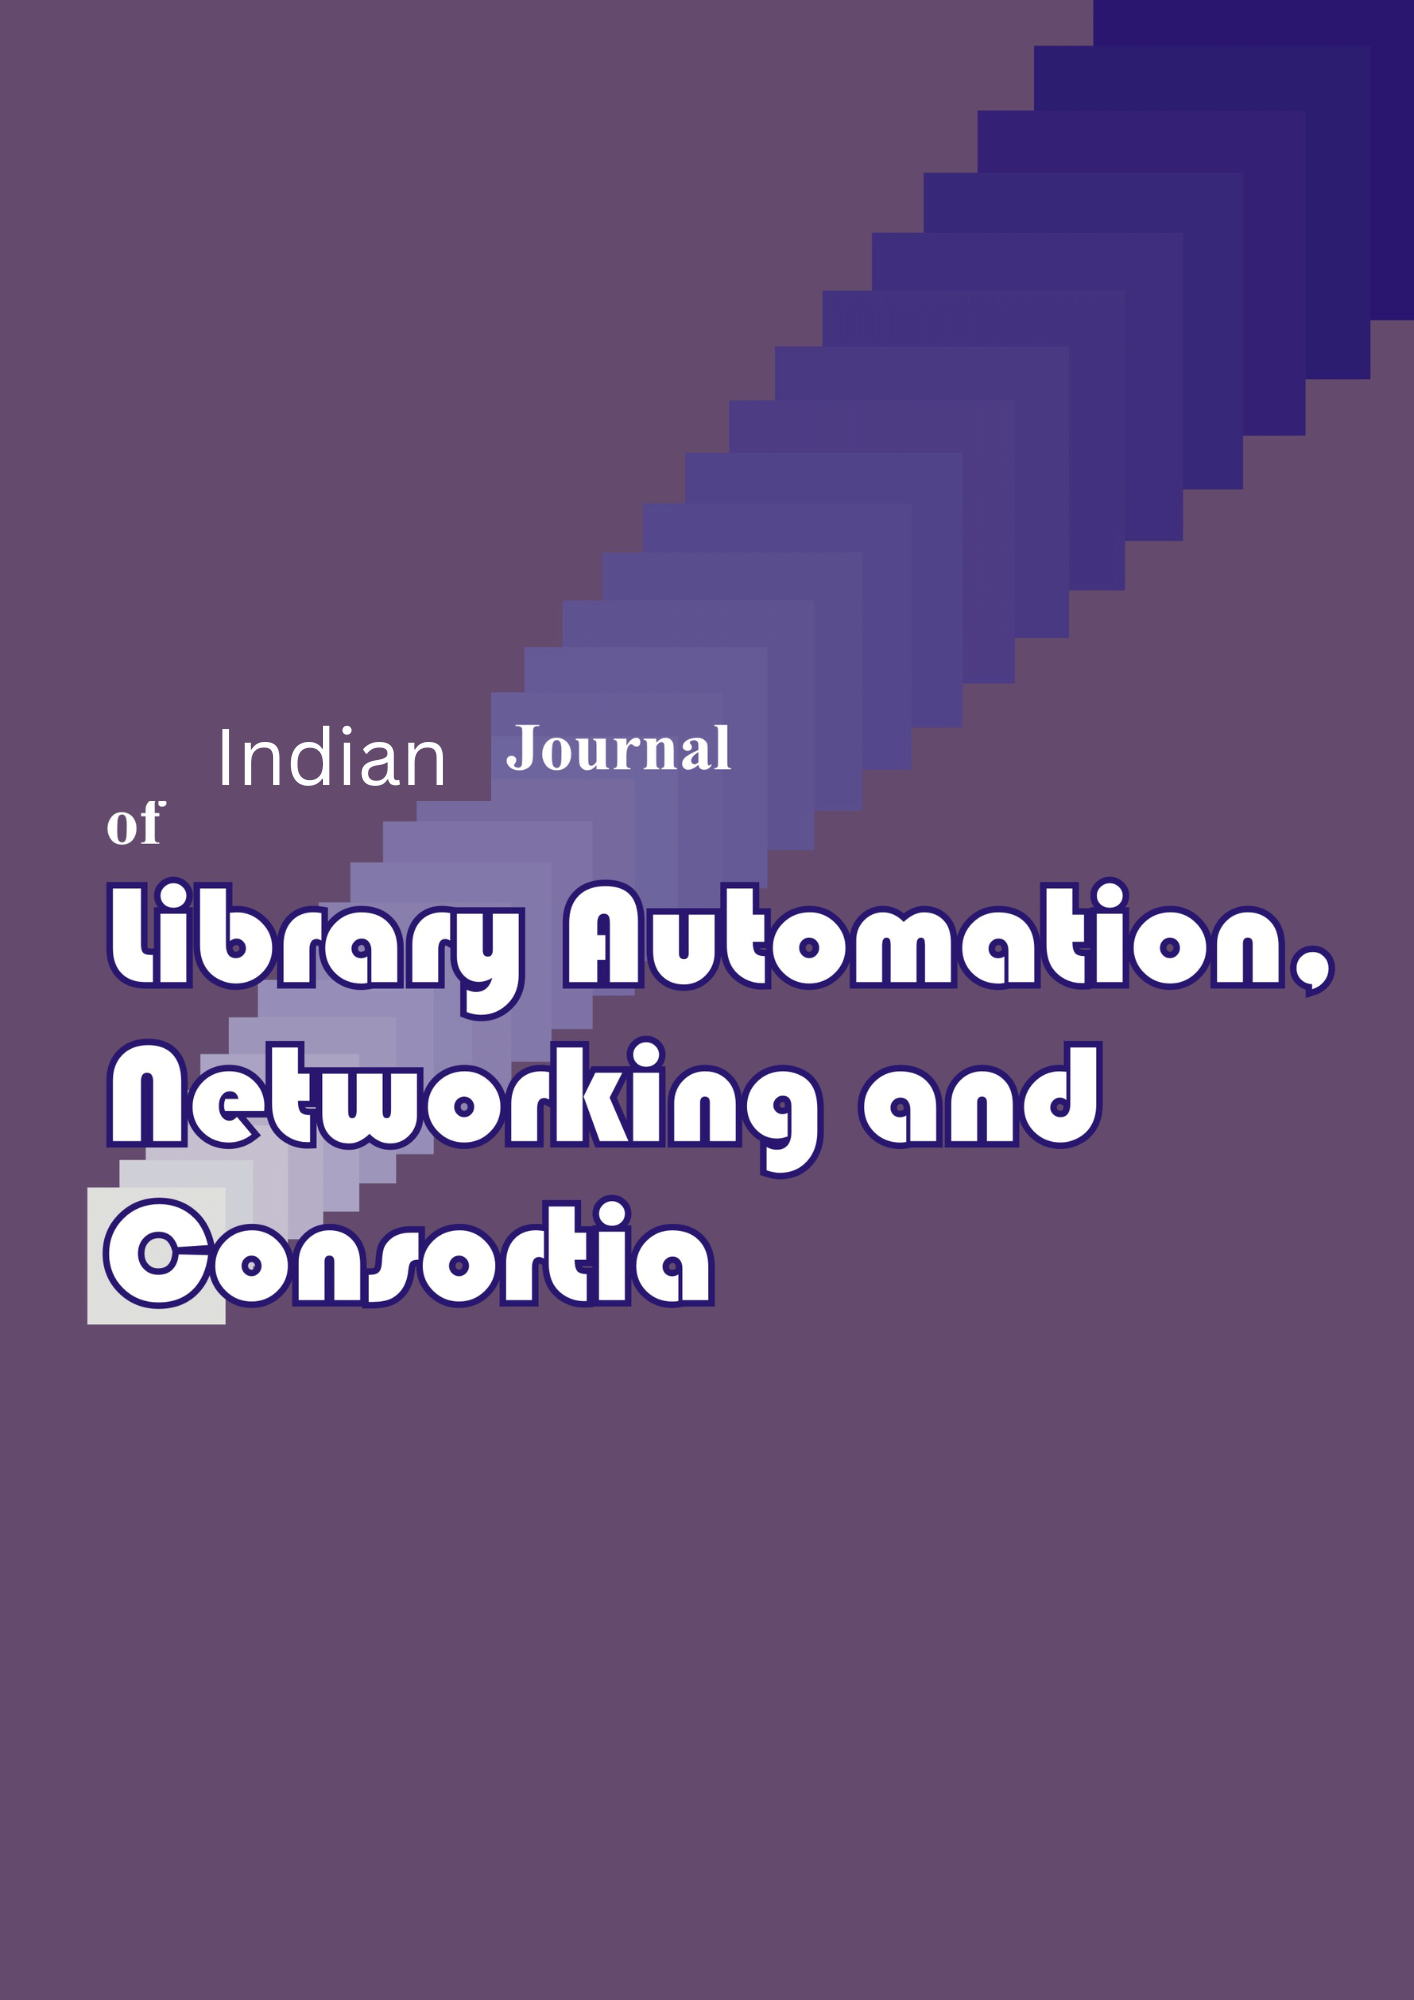 Indian Journal of Library Automation, Networking and Consortia